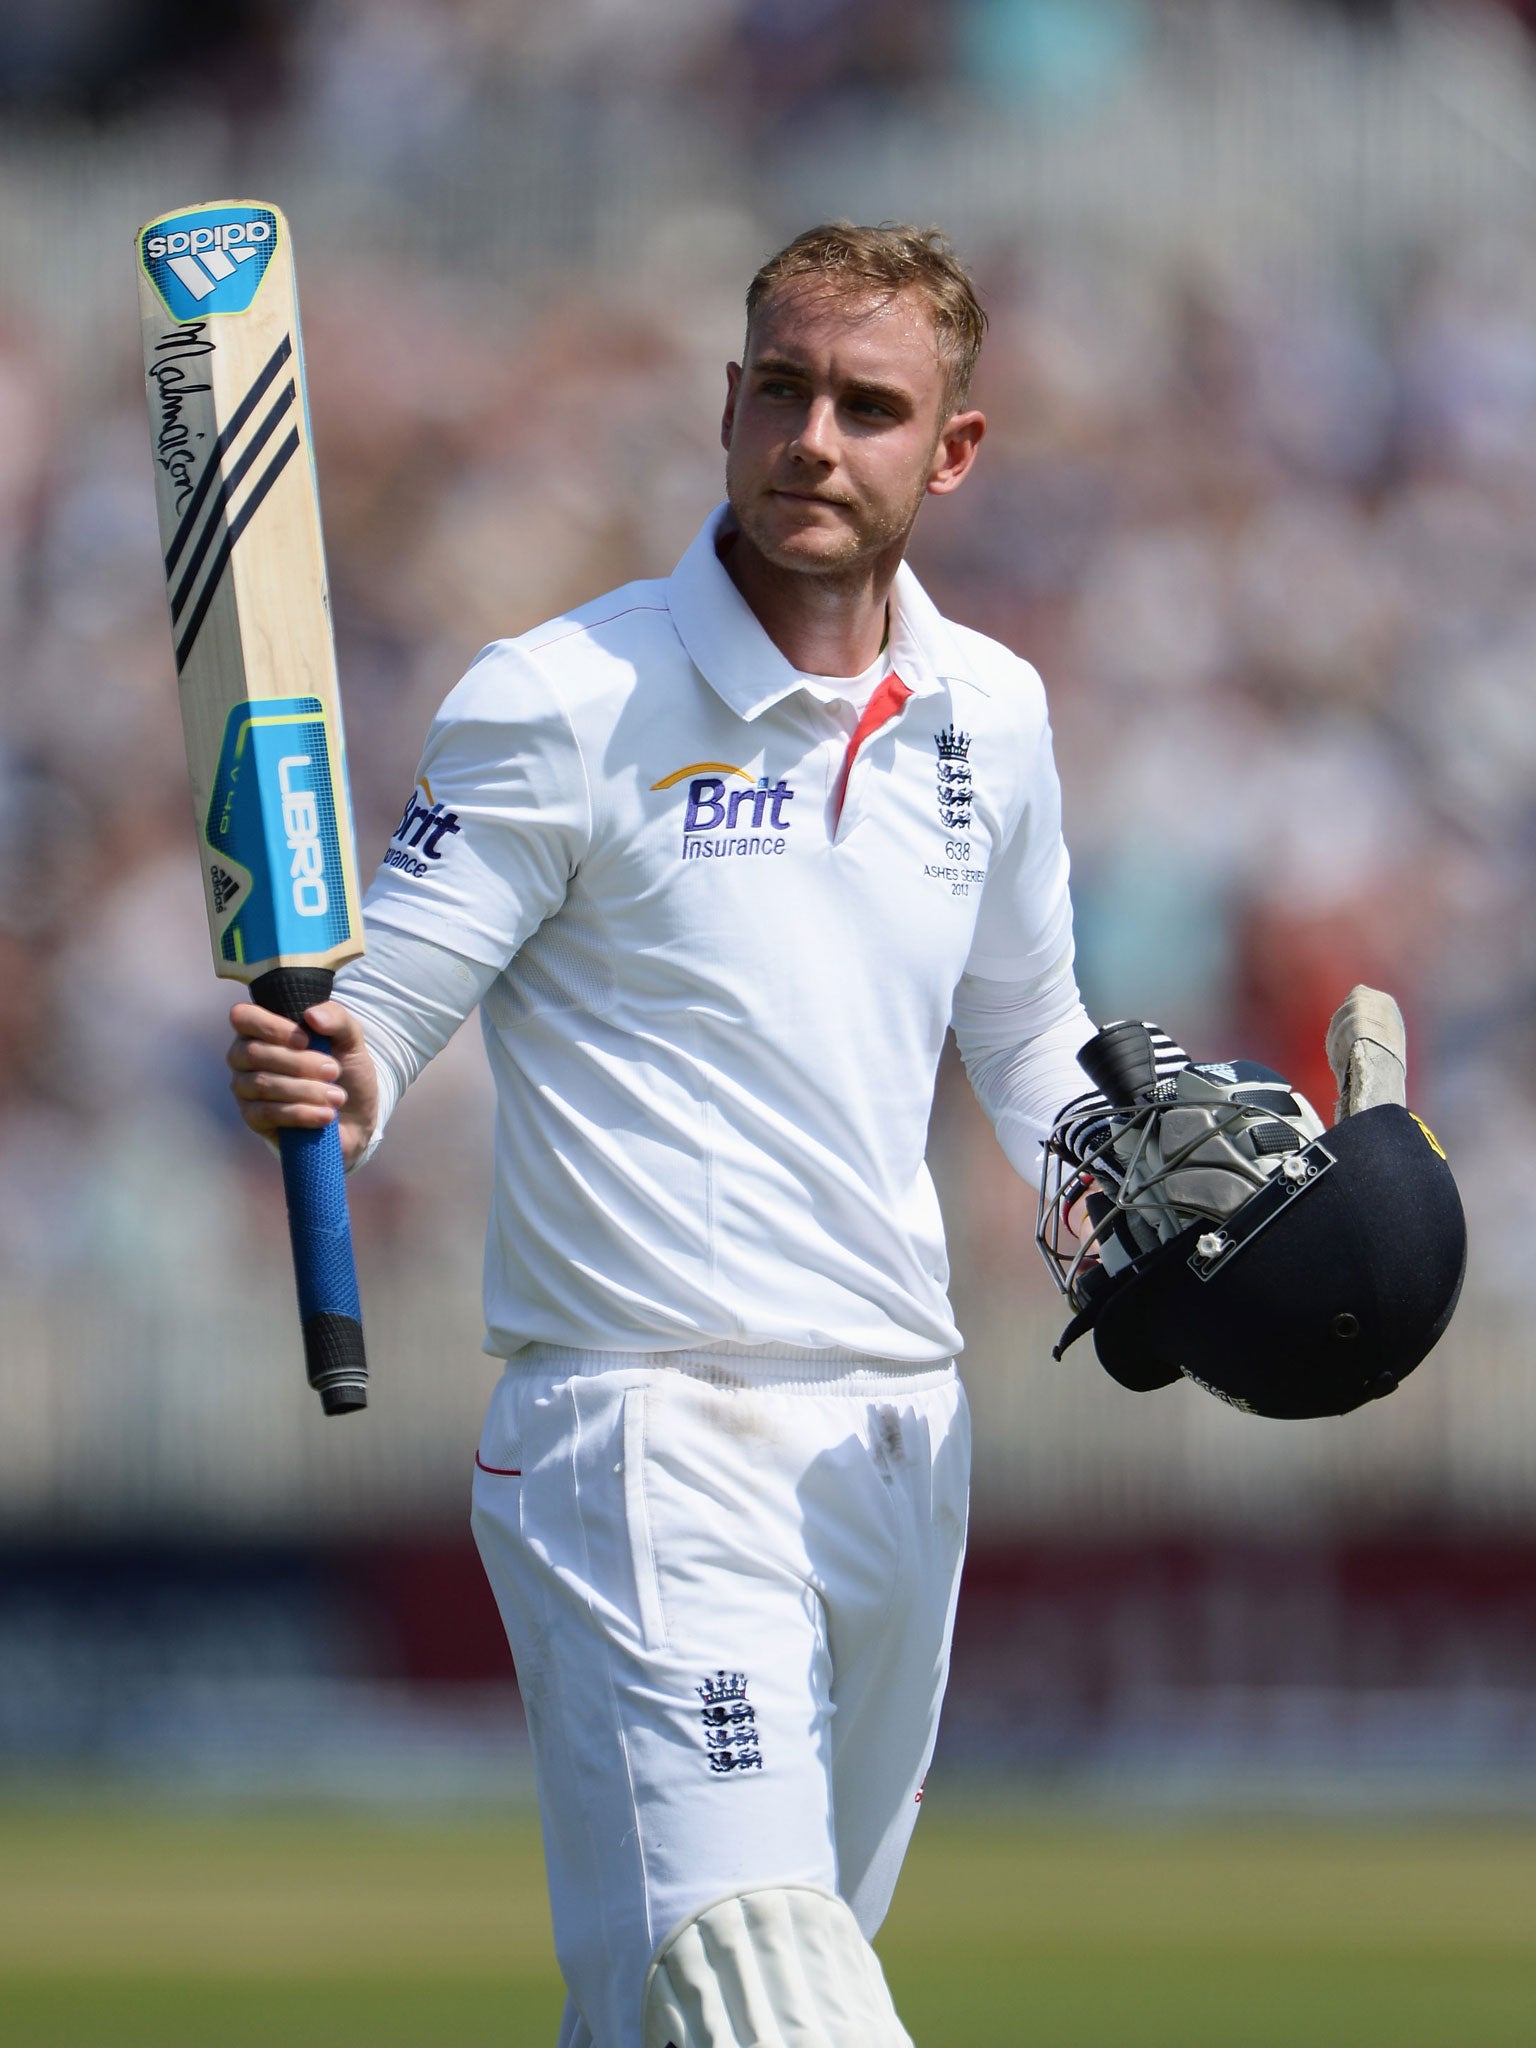 Stuart Broad ’s non-dismissal when he was caught behind on the third day only for umpire Aleem Dar to deny Australia, was the most prominent moment